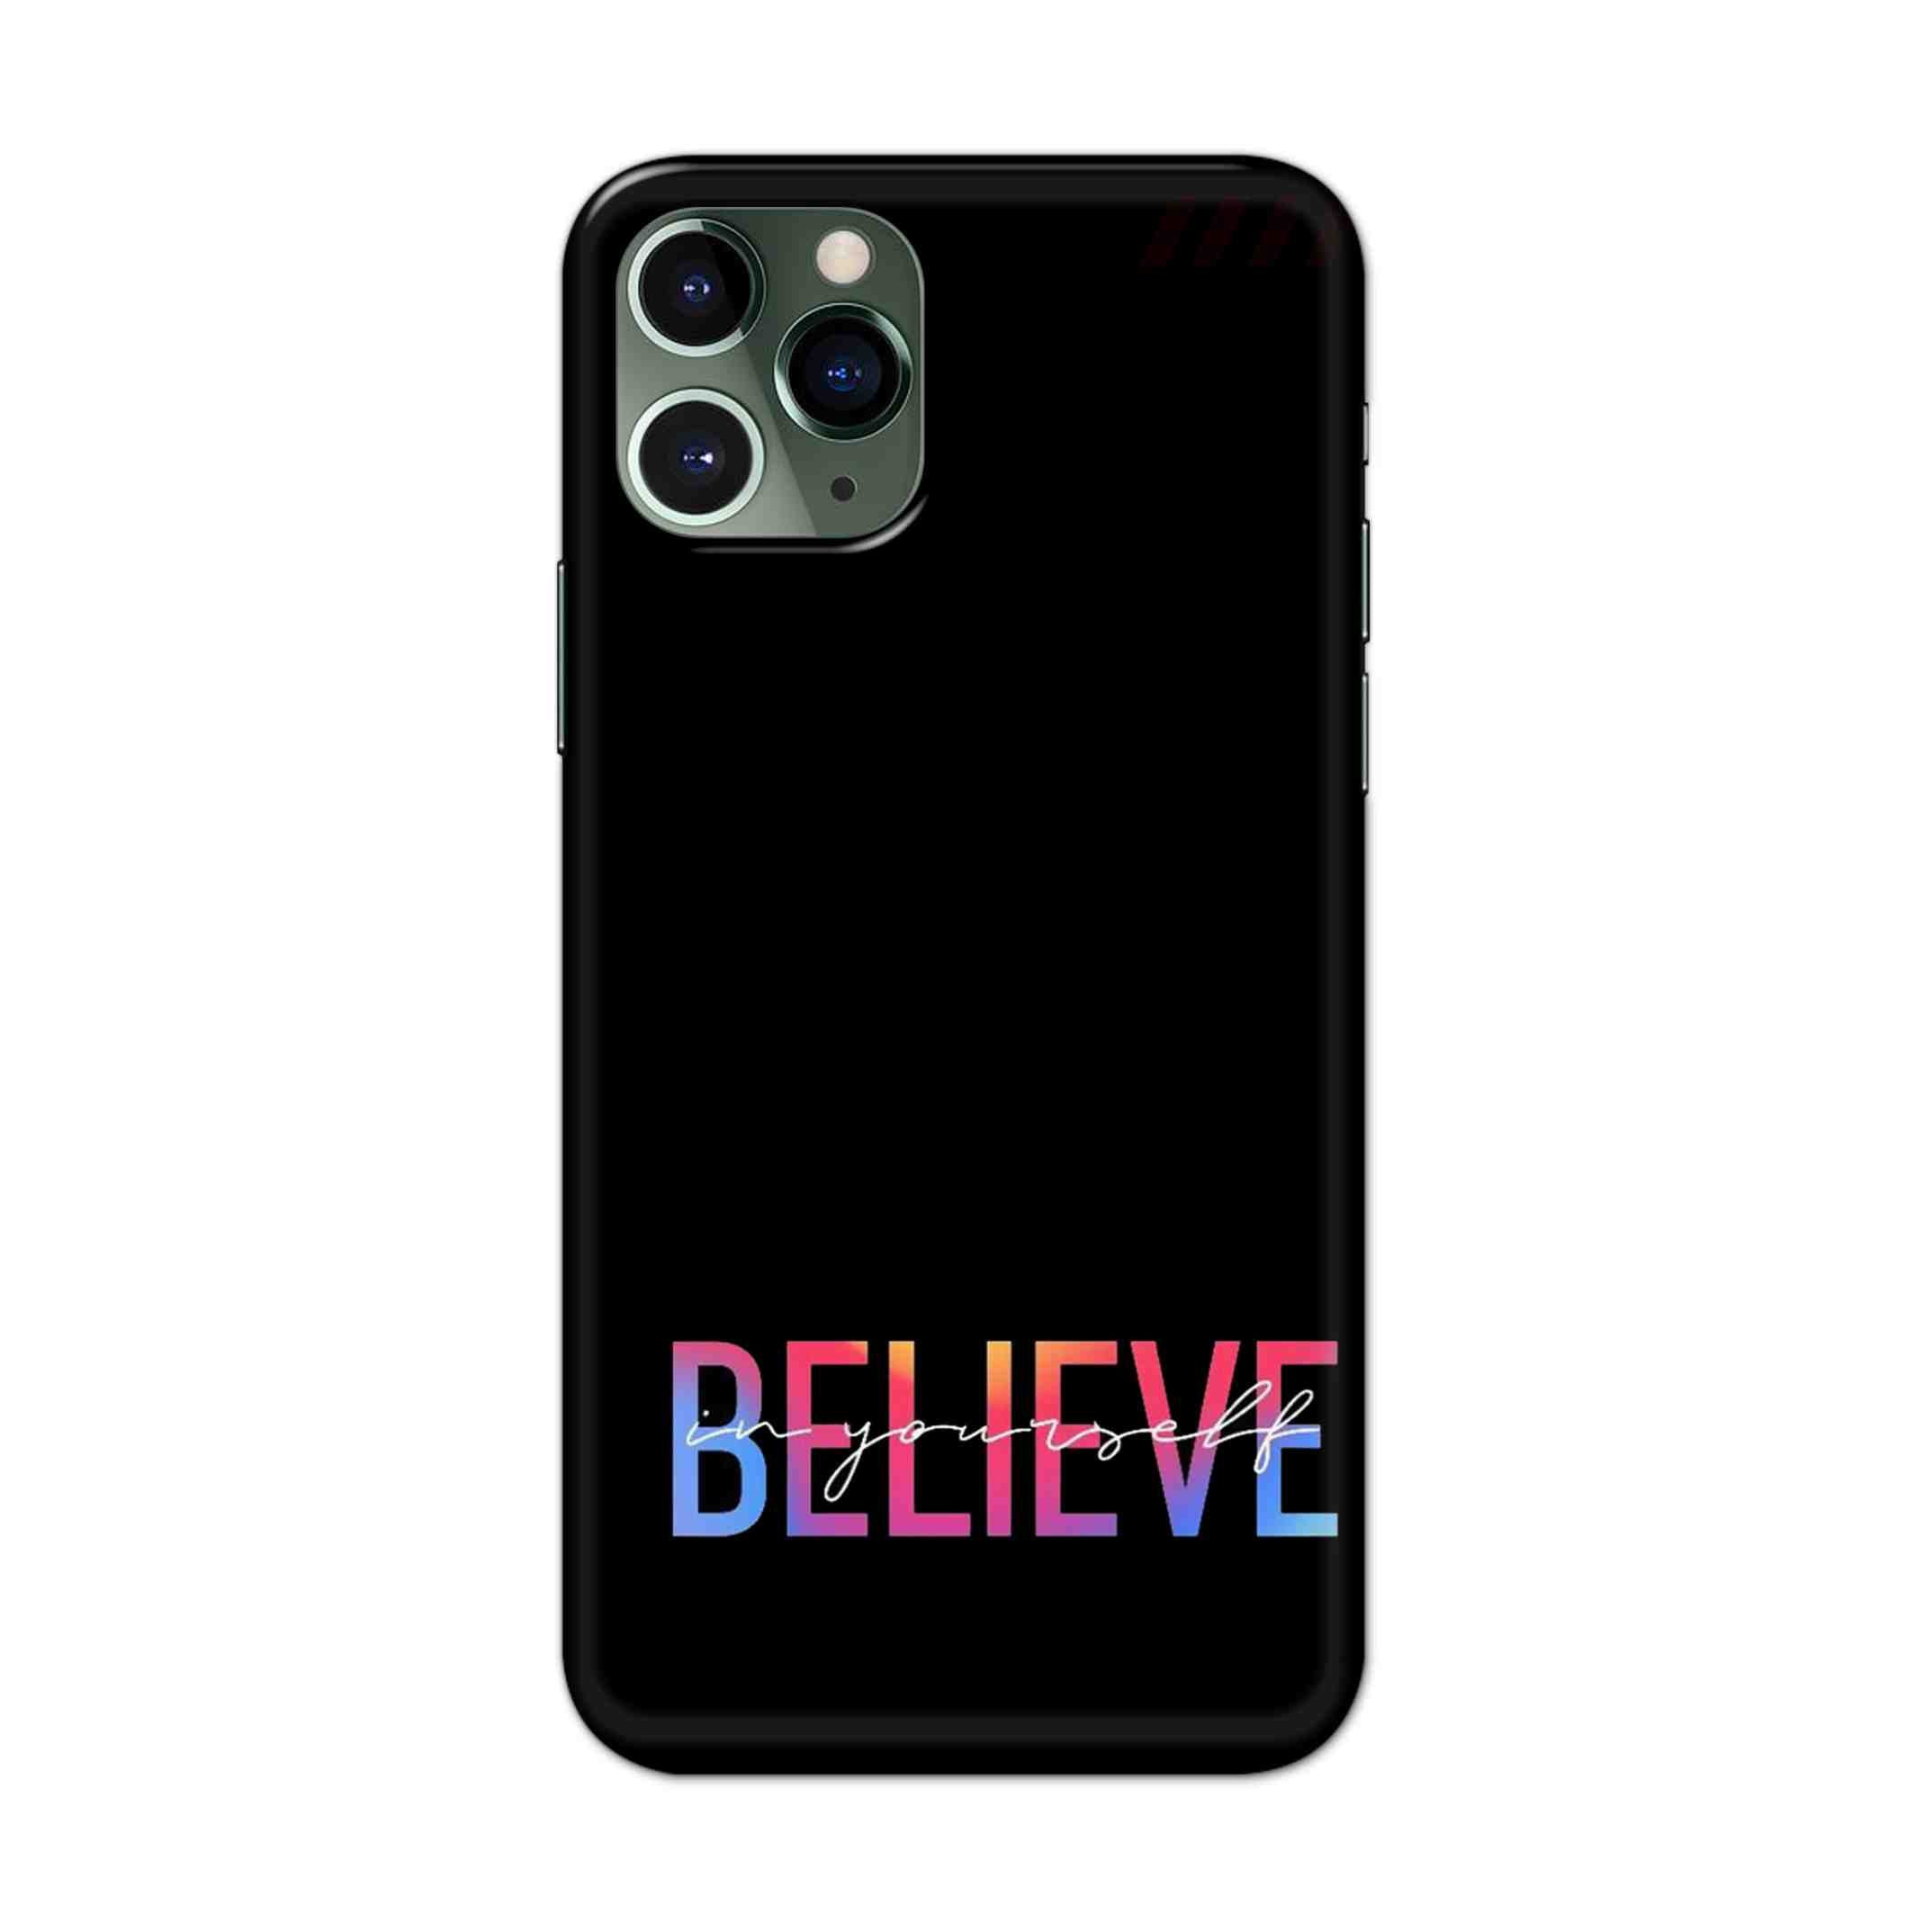 Buy Believe Hard Back Mobile Phone Case/Cover For iPhone 11 Pro Max Online